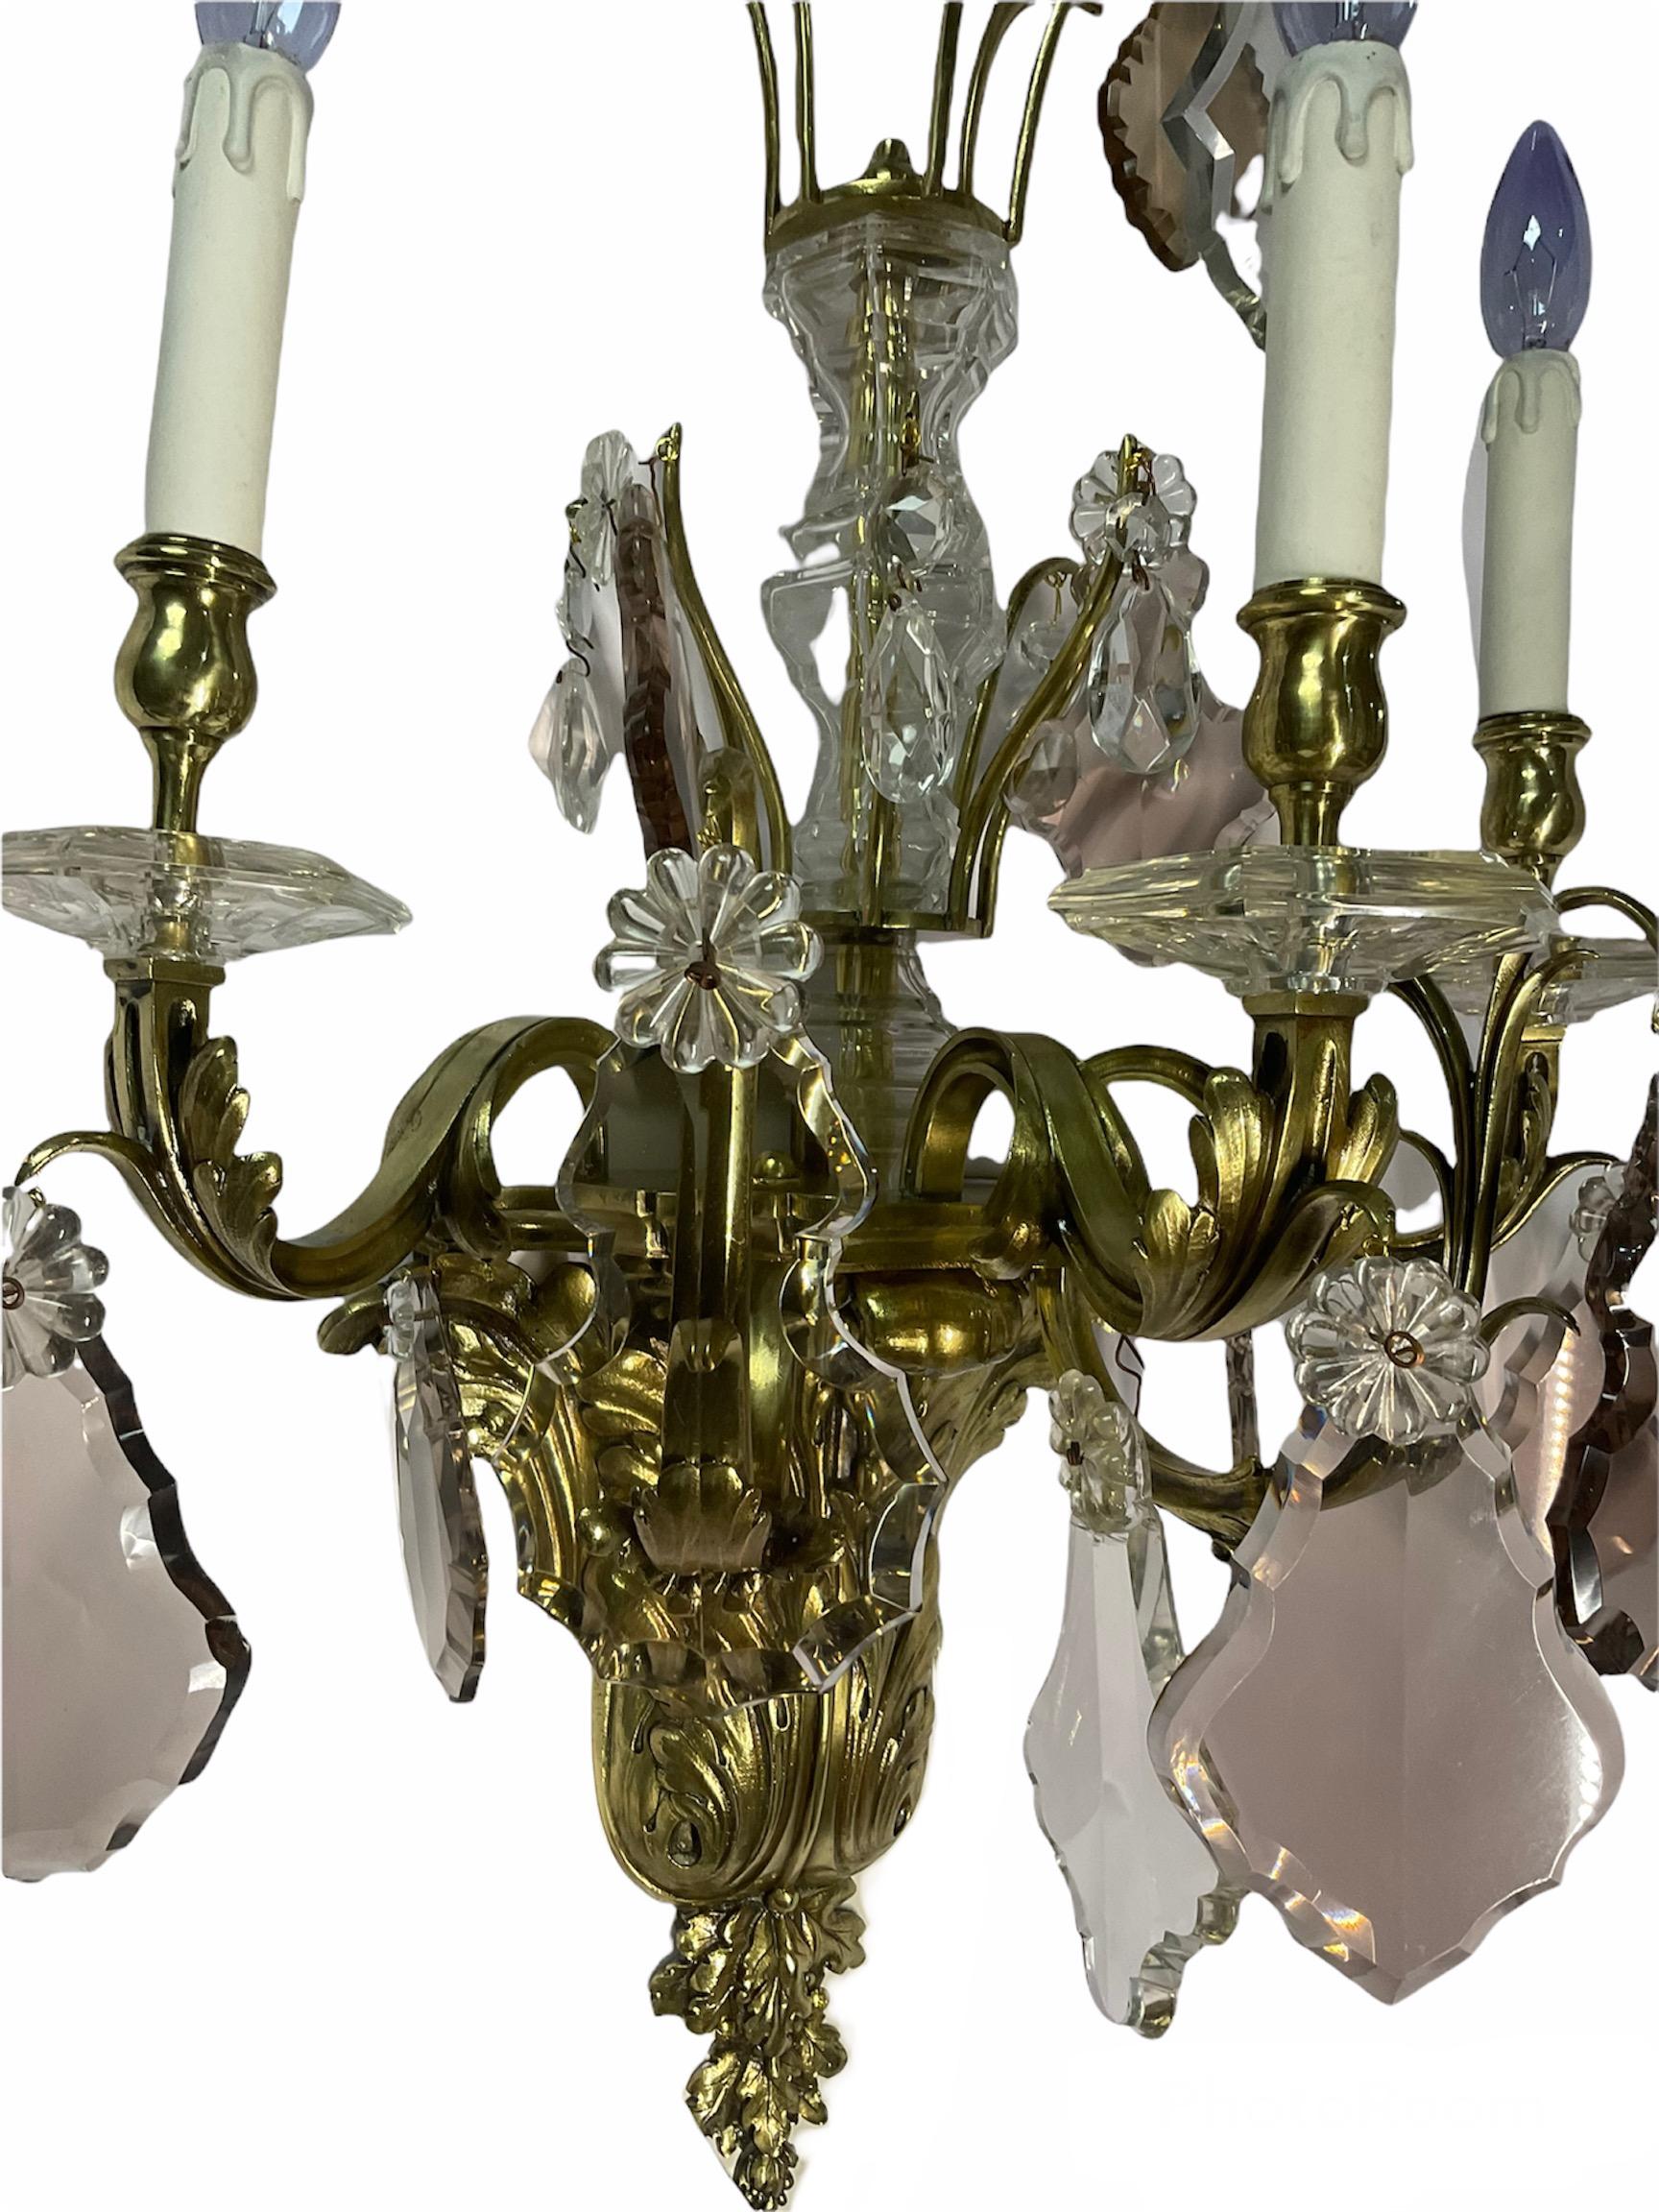 This is a Rococo Louis XV style pair of gilt bronze wall sconces. Their main body is made of three short bronze arms at the top embellished with clear pressed crystal rosettes and pendalogues over a cut crystal urn shaped tower that cover a gilt